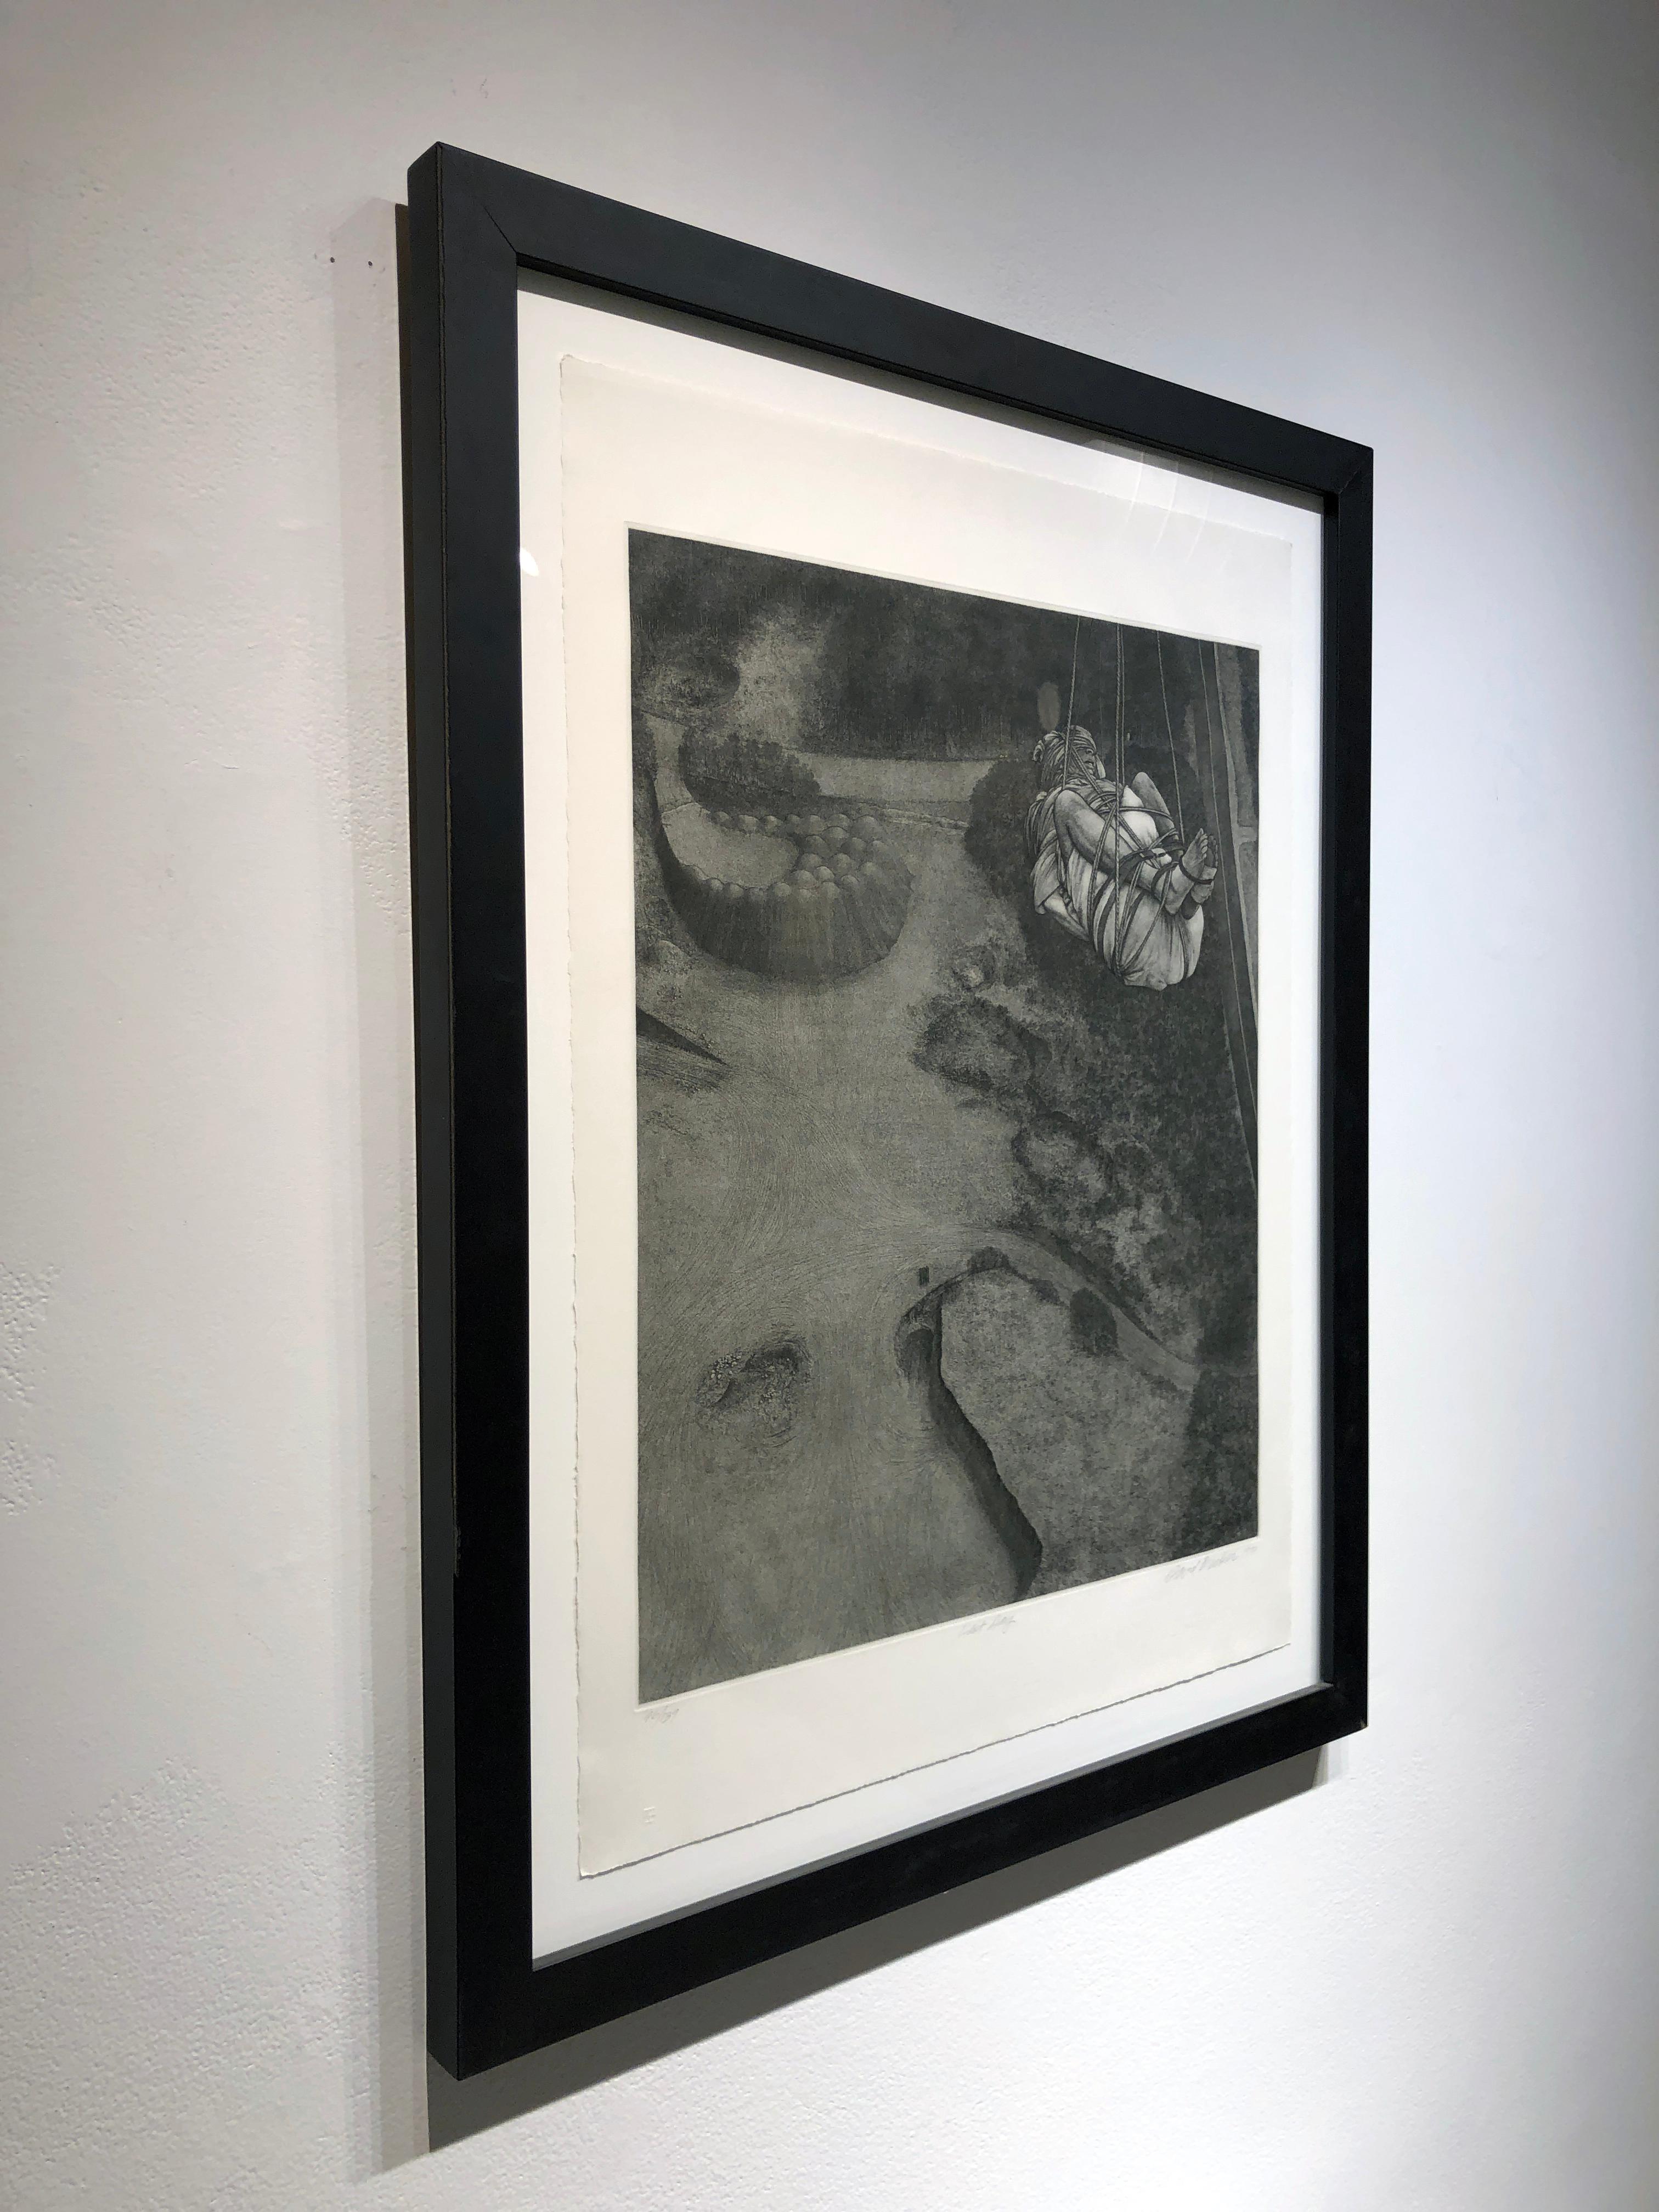  Last Day, Bound Figure, Dangling Over Sparse Landscape, Etching - Print by David Becker